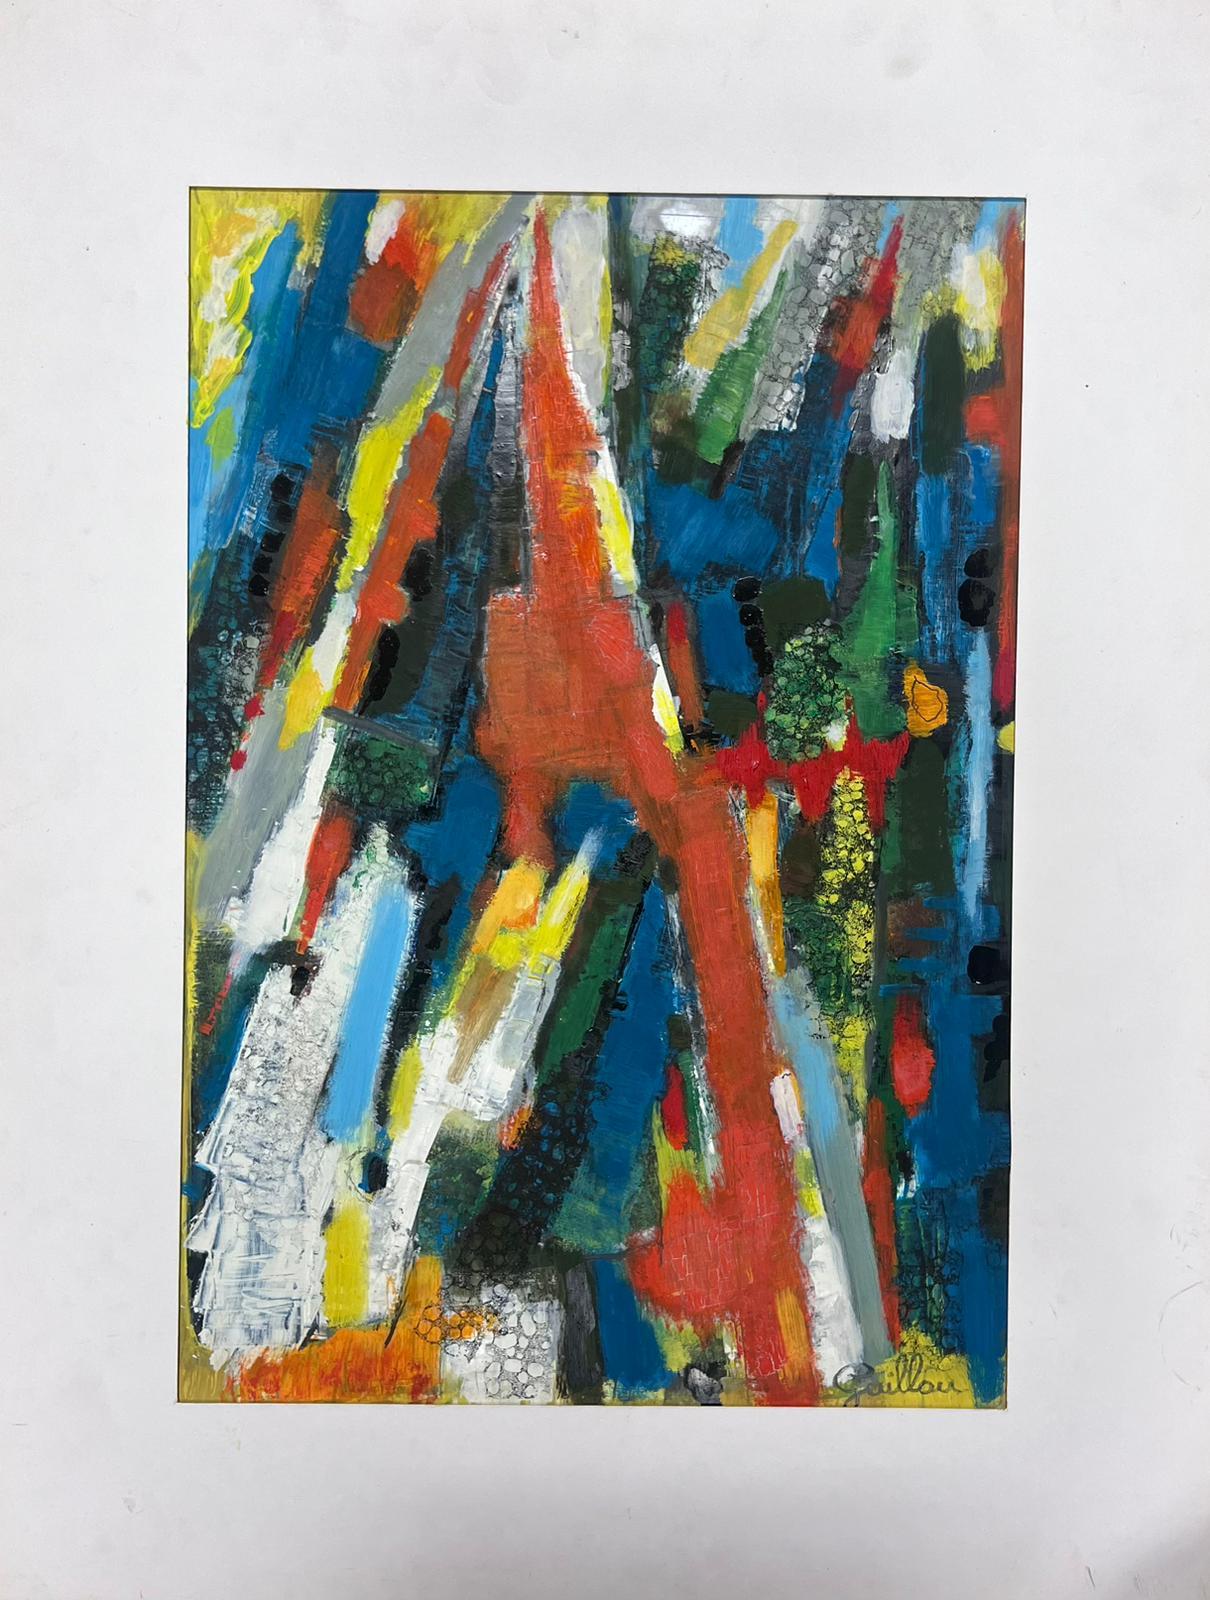 Abstract Expressionist composition
by Andre Guillou (French 1925-2017) 
signed oil on board stuck on board, mounted
mount: 25.5 x 19.75 inches
board: 19 x 13 inches
provenance: the artists estate, France
condition: very good and sound condition